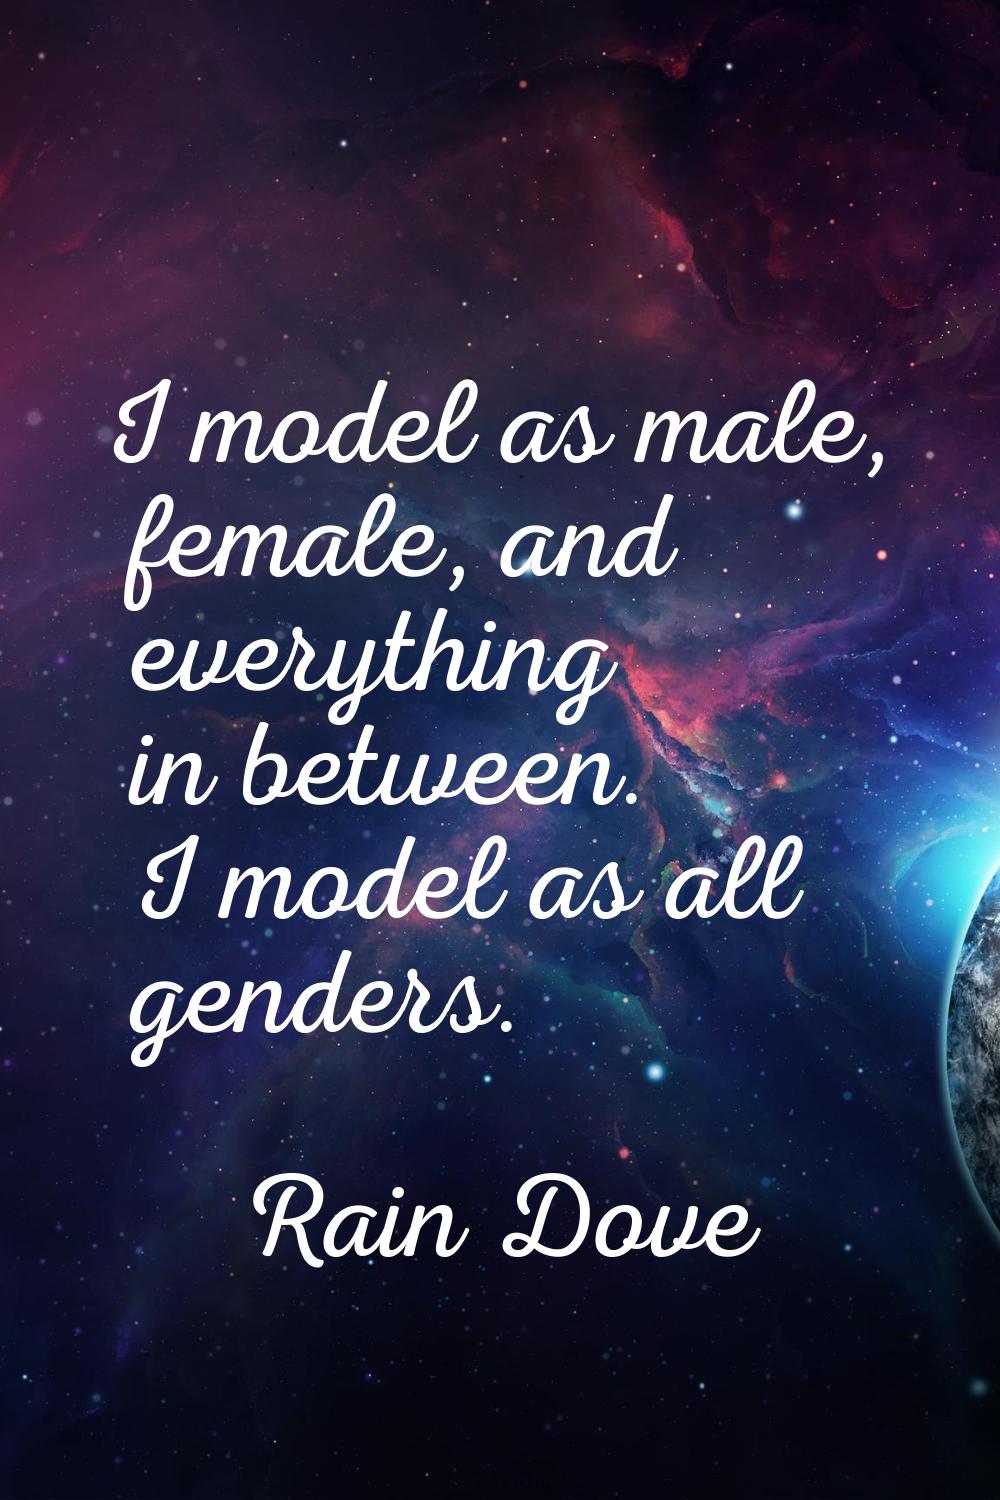 I model as male, female, and everything in between. I model as all genders.